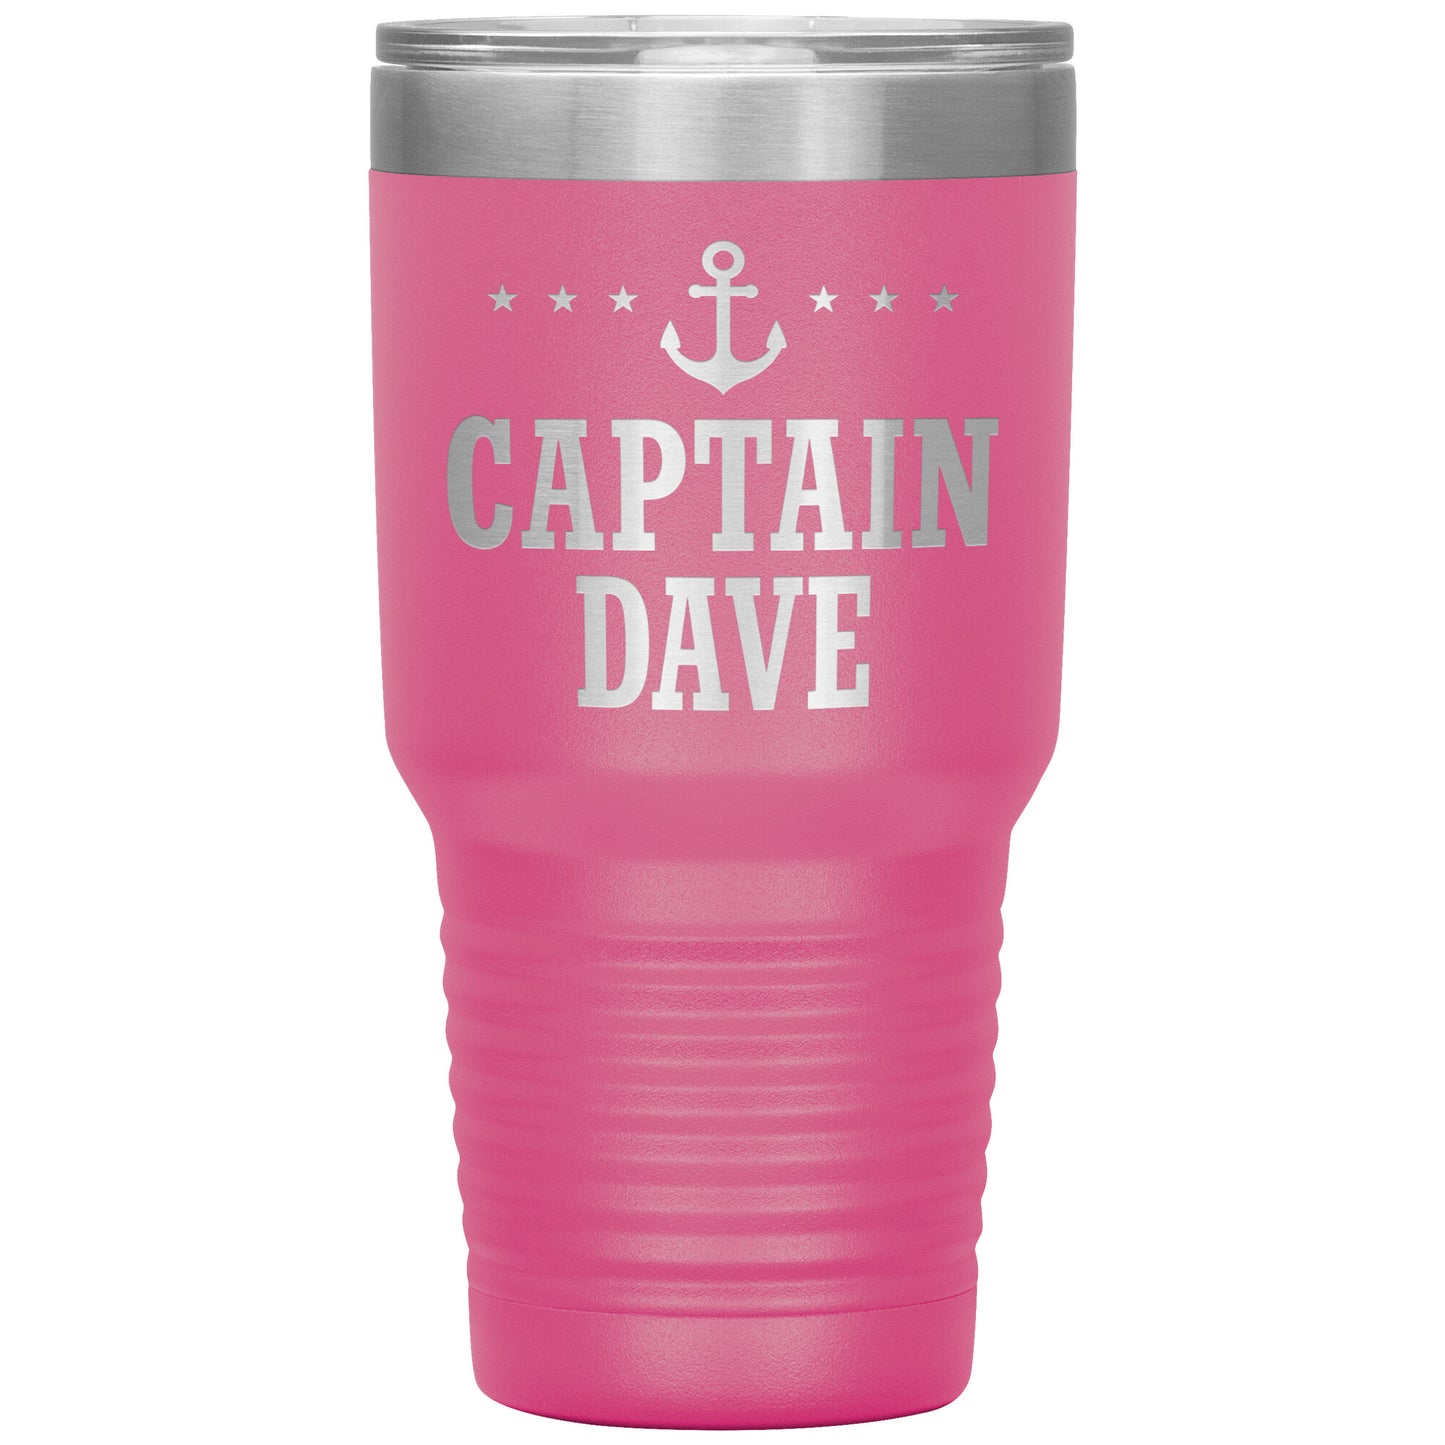 Personalized SML Boat Captain Drink Tumbler - Laser Etched